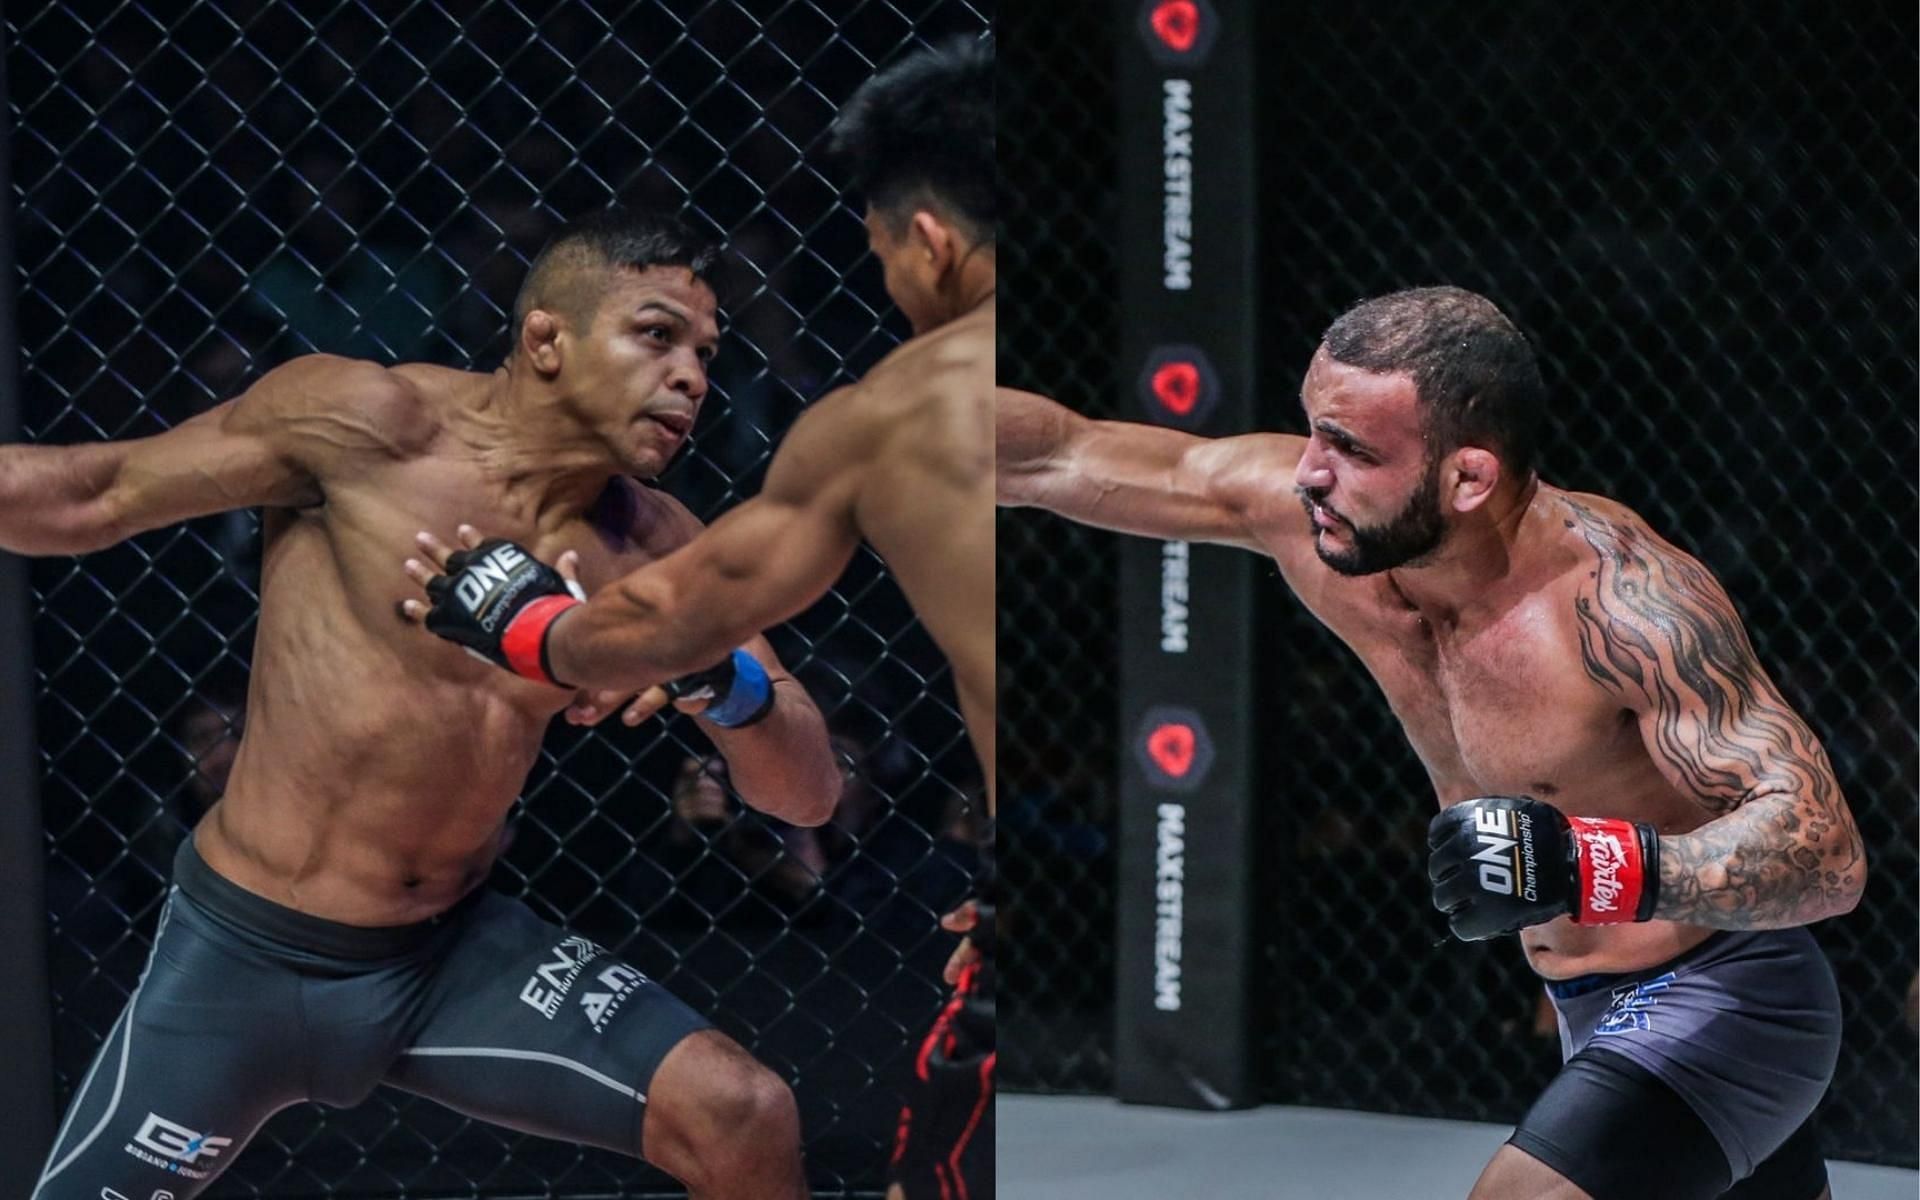 ONE Championship world champion Bibiano Fernandes (left) vs. John Lineker (right) have the makings of a rivalry for the ages. (Images courtesy of ONE Championship)